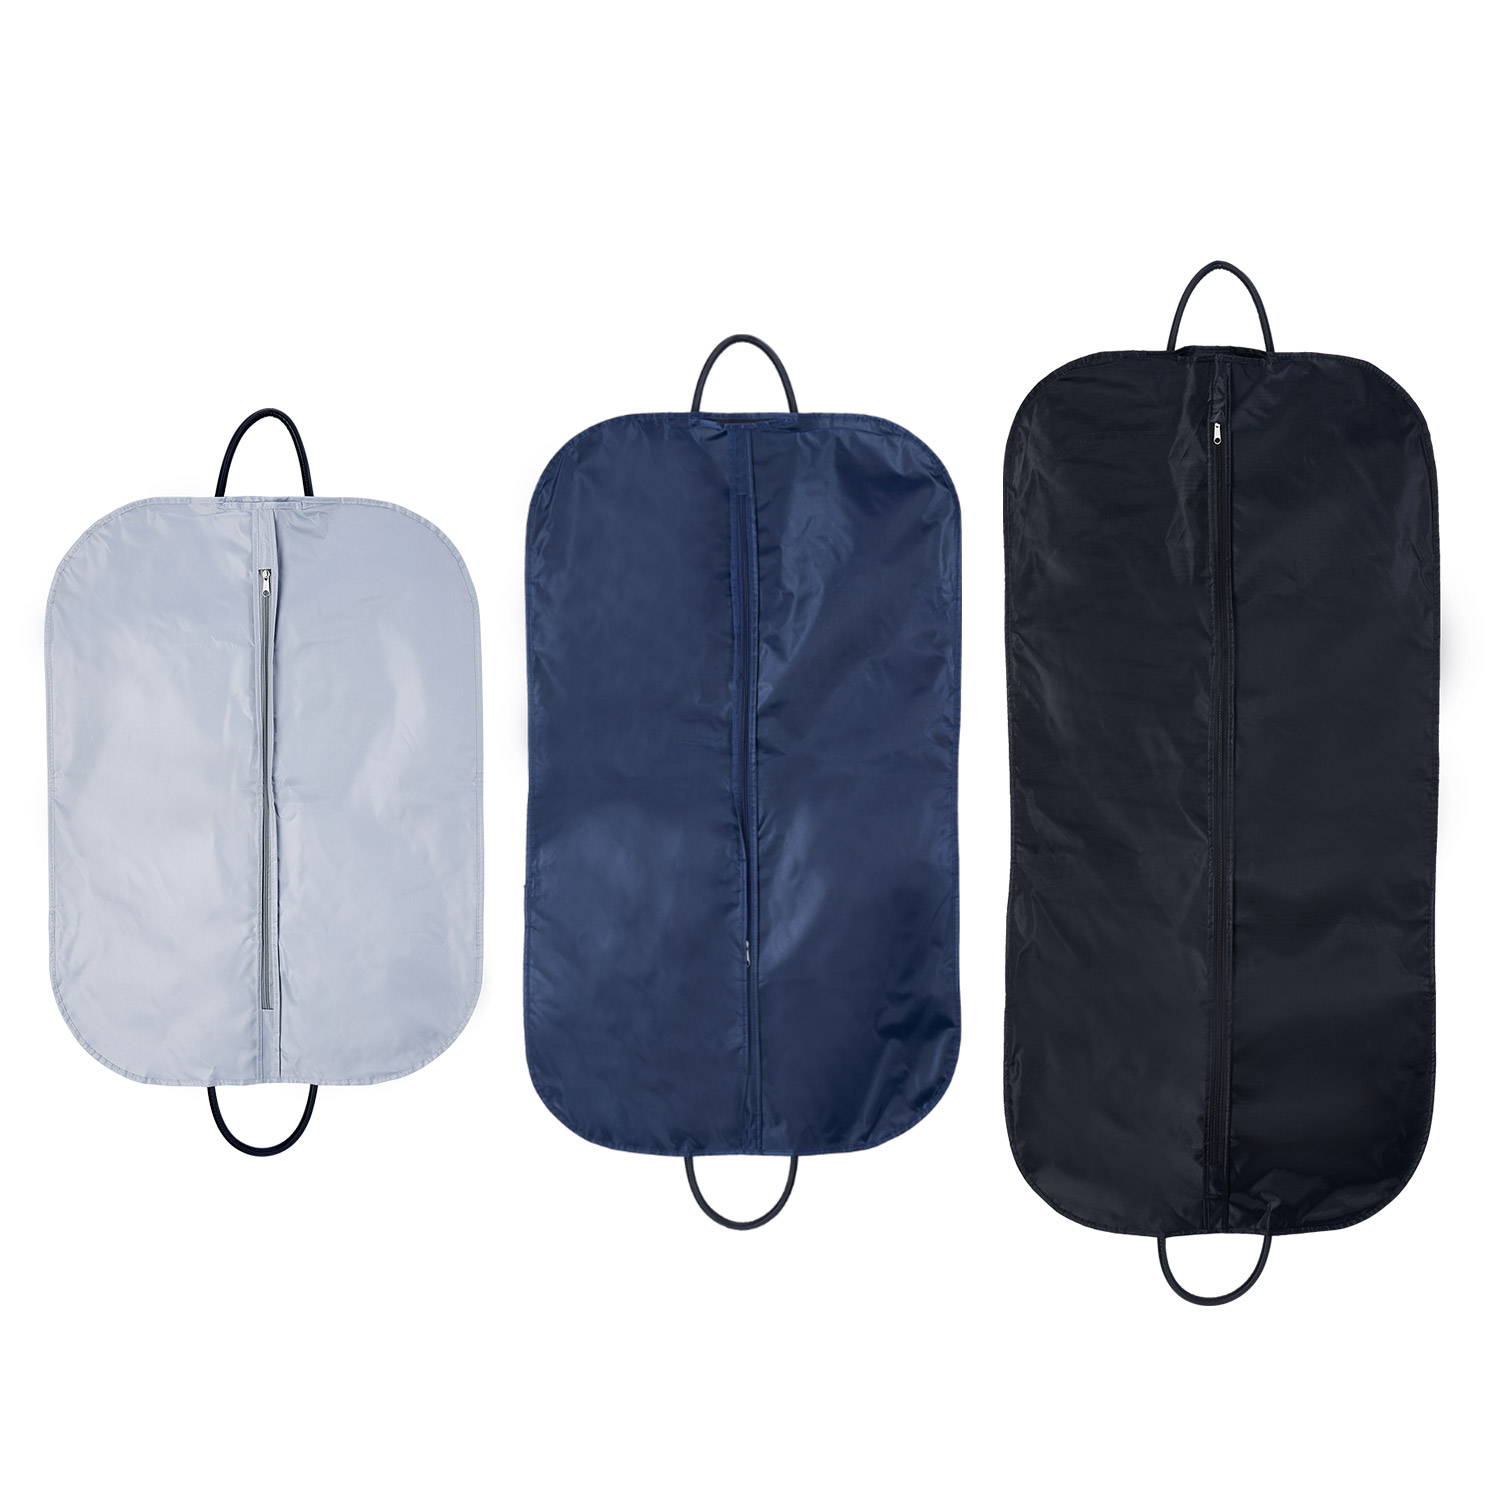 Pioneering Sustainable Packaging with Biodegradable Garment Bags